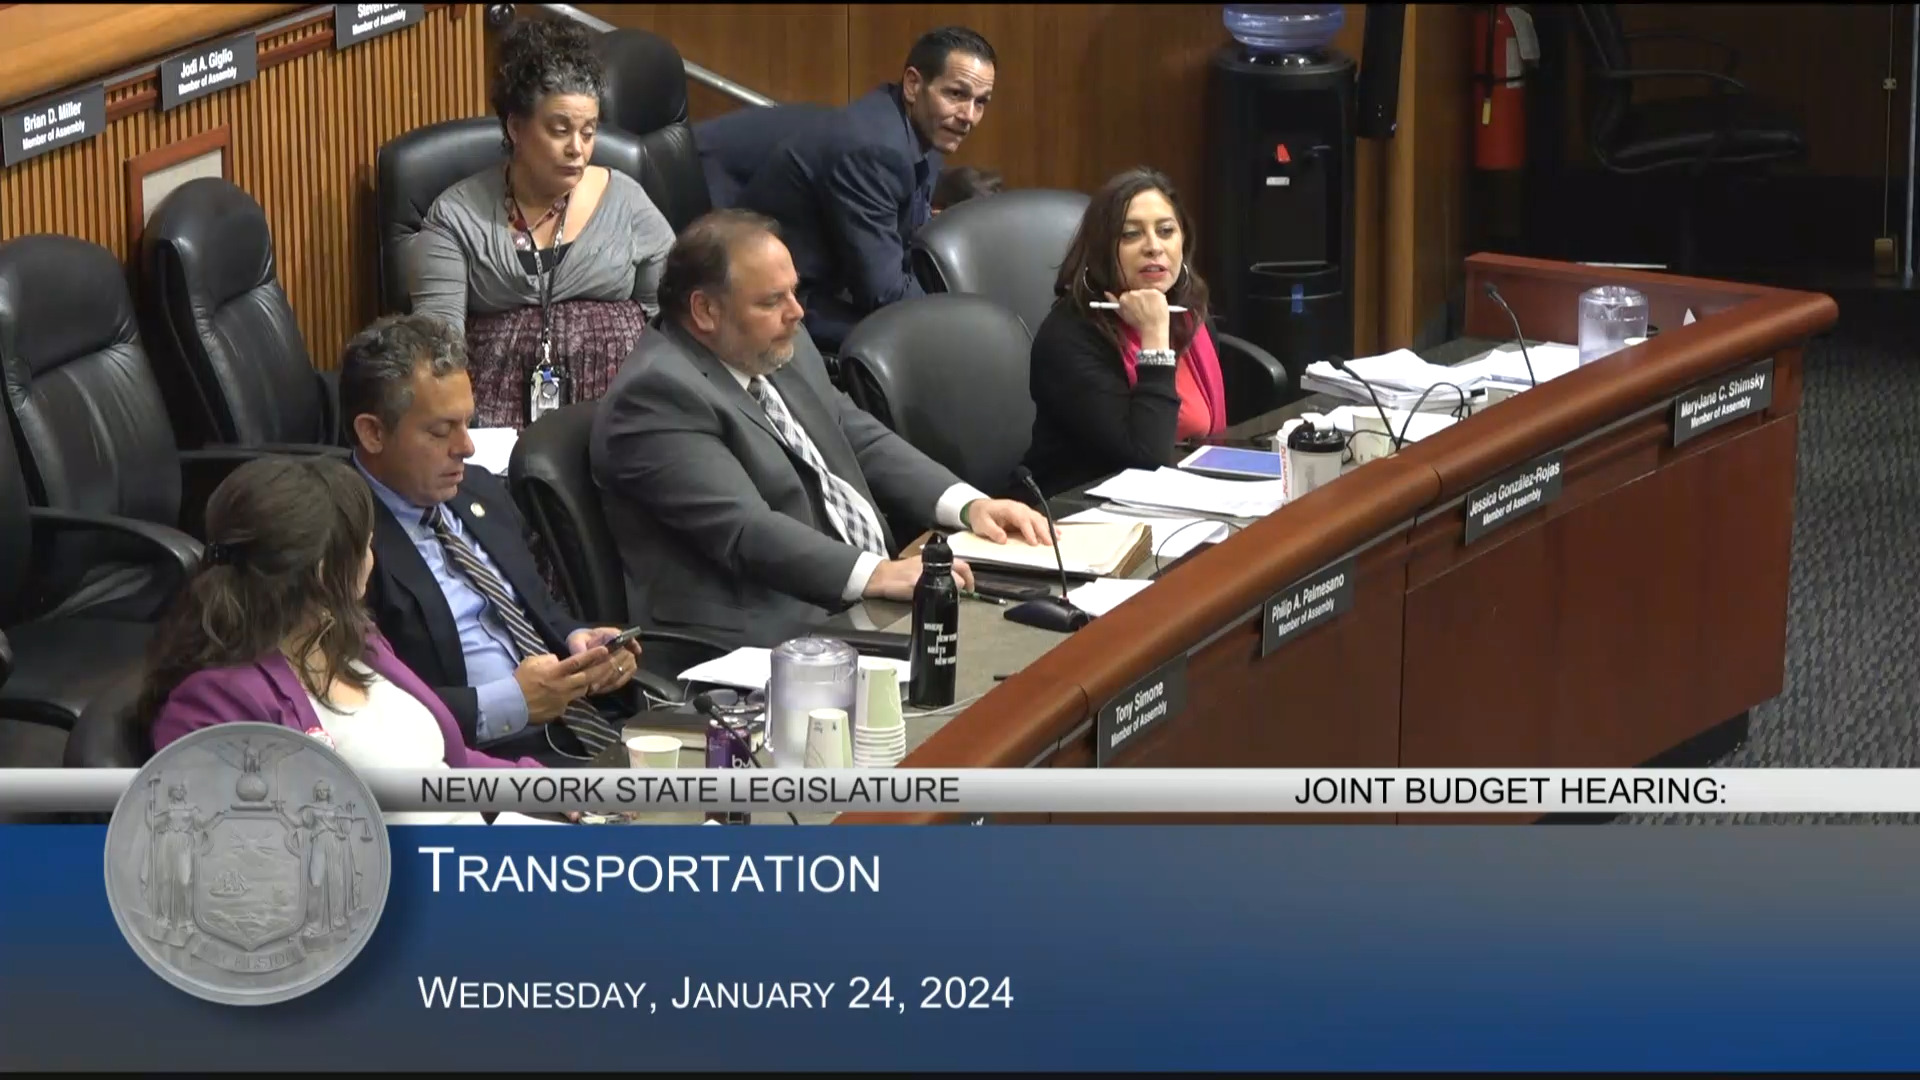 DOT Commissioner Testifies During Joint Budget Hearing on Transportation